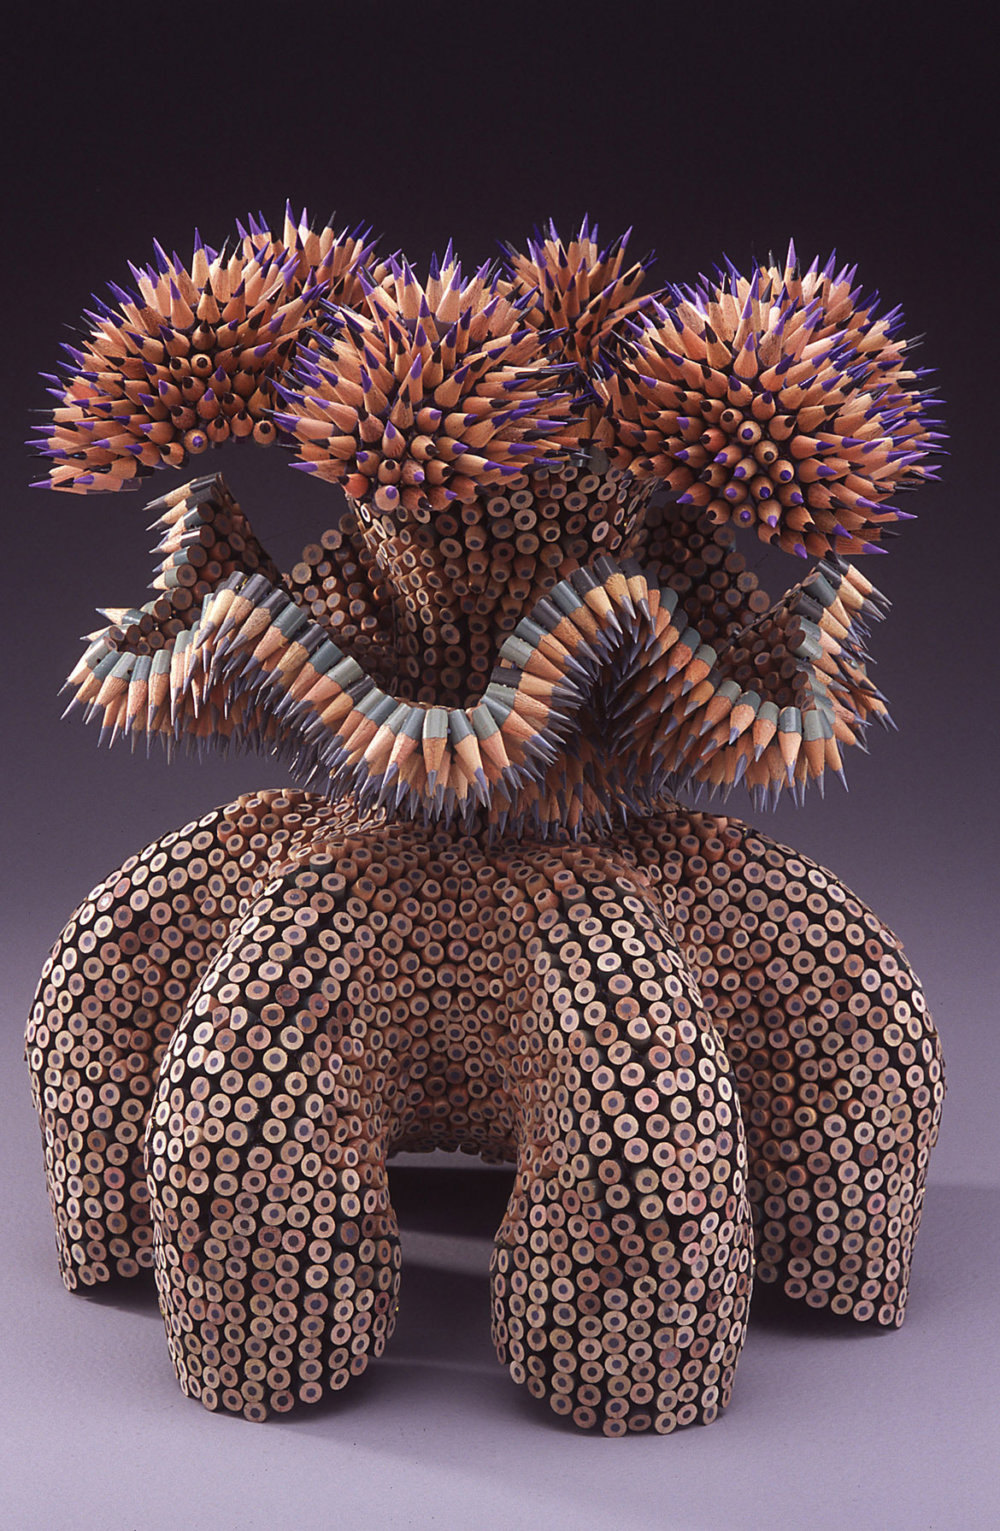 Kinesthetic Sculptures Made Out Of Colored Pencils By Jennifer Maestre 16